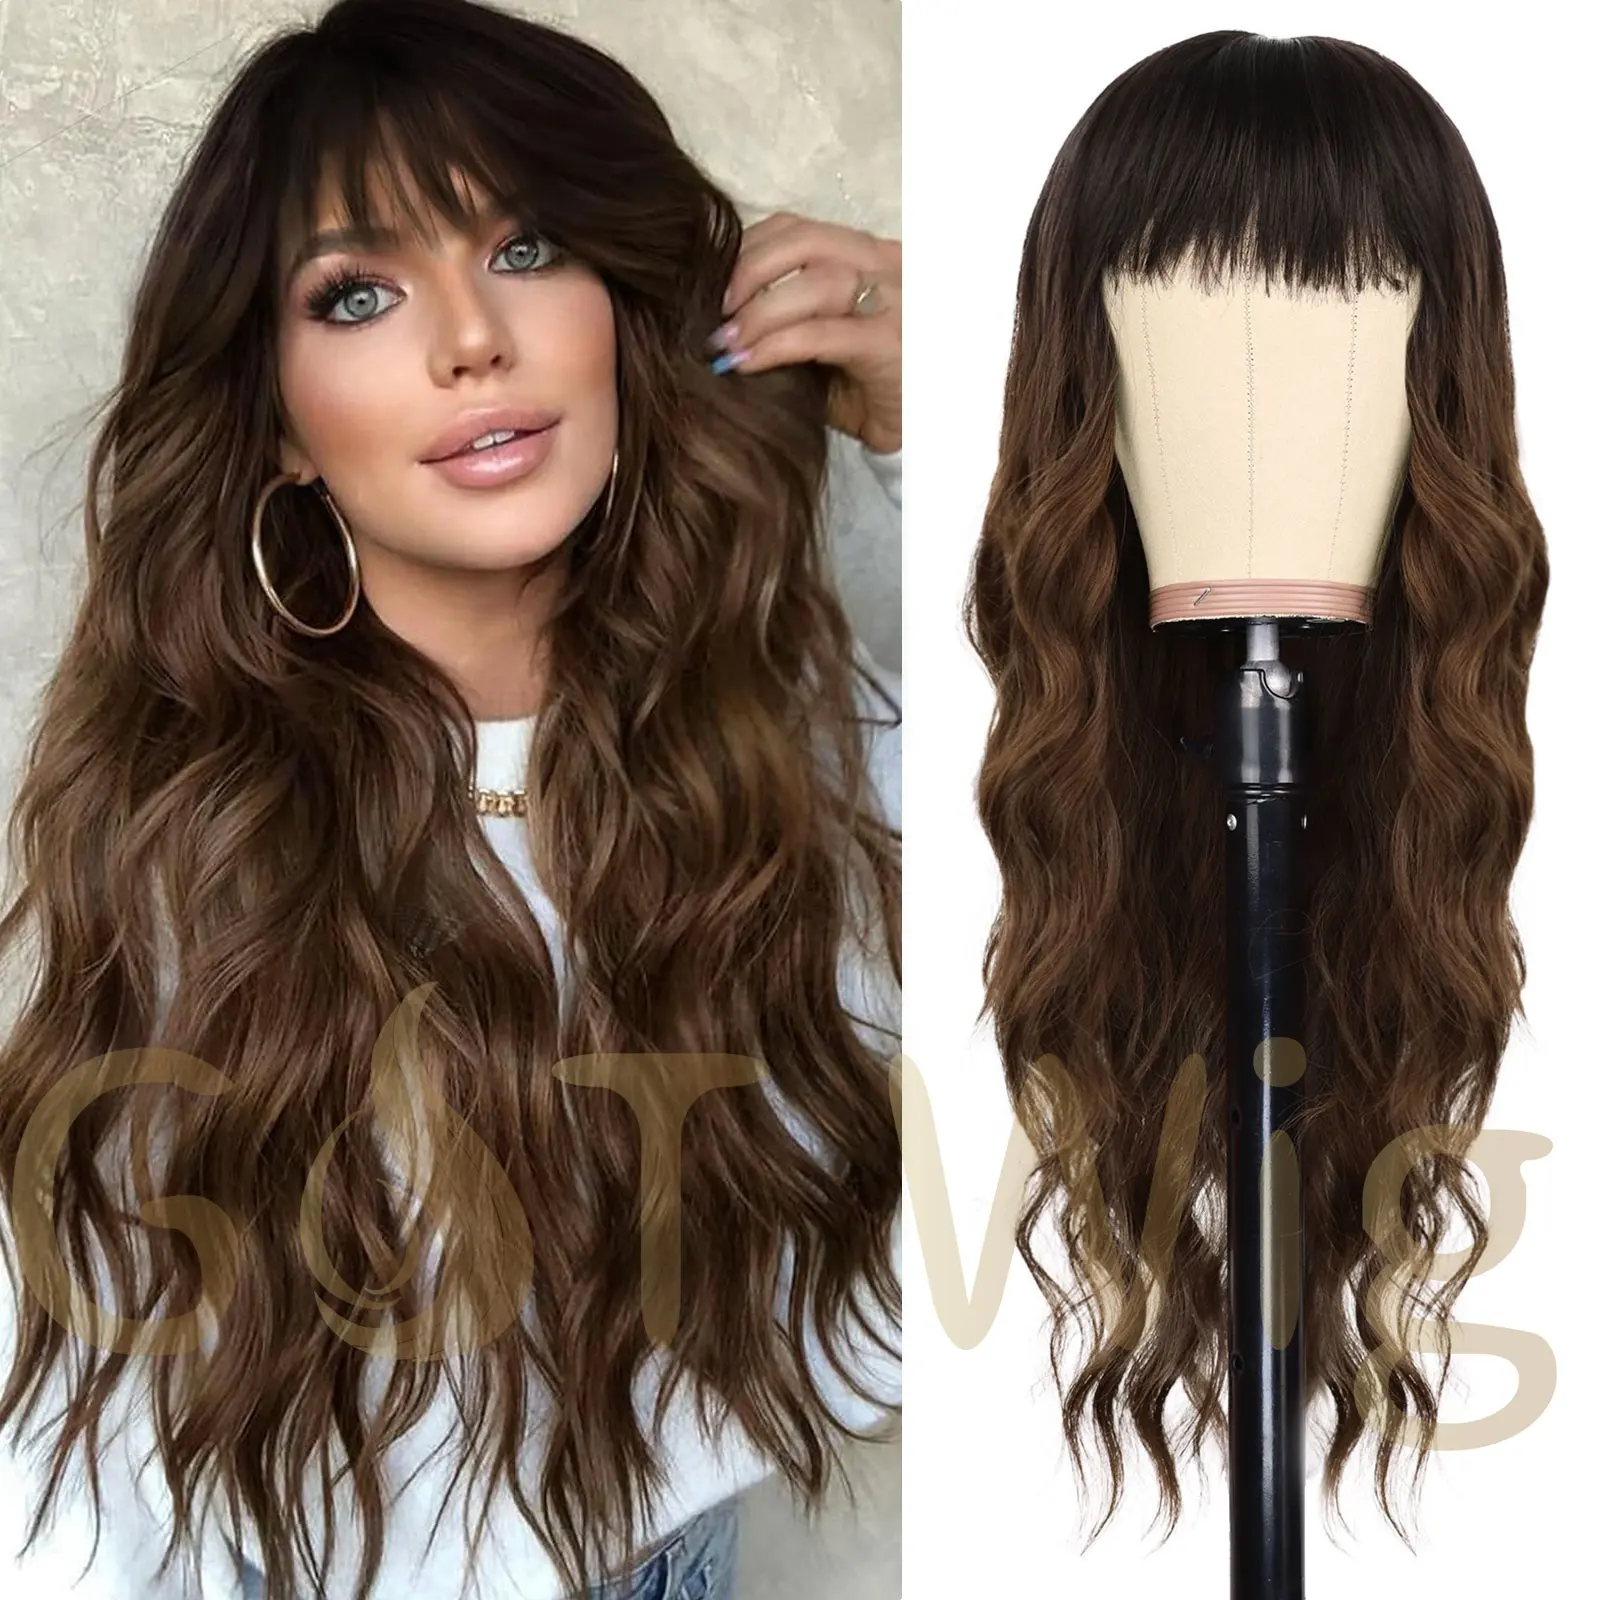 G&T Wigs Ombre Brown Wig with Bangs for Women Long Wavy Synthetic Heat Resistant Fiber Curly Wigs for Girls Daily Party Use